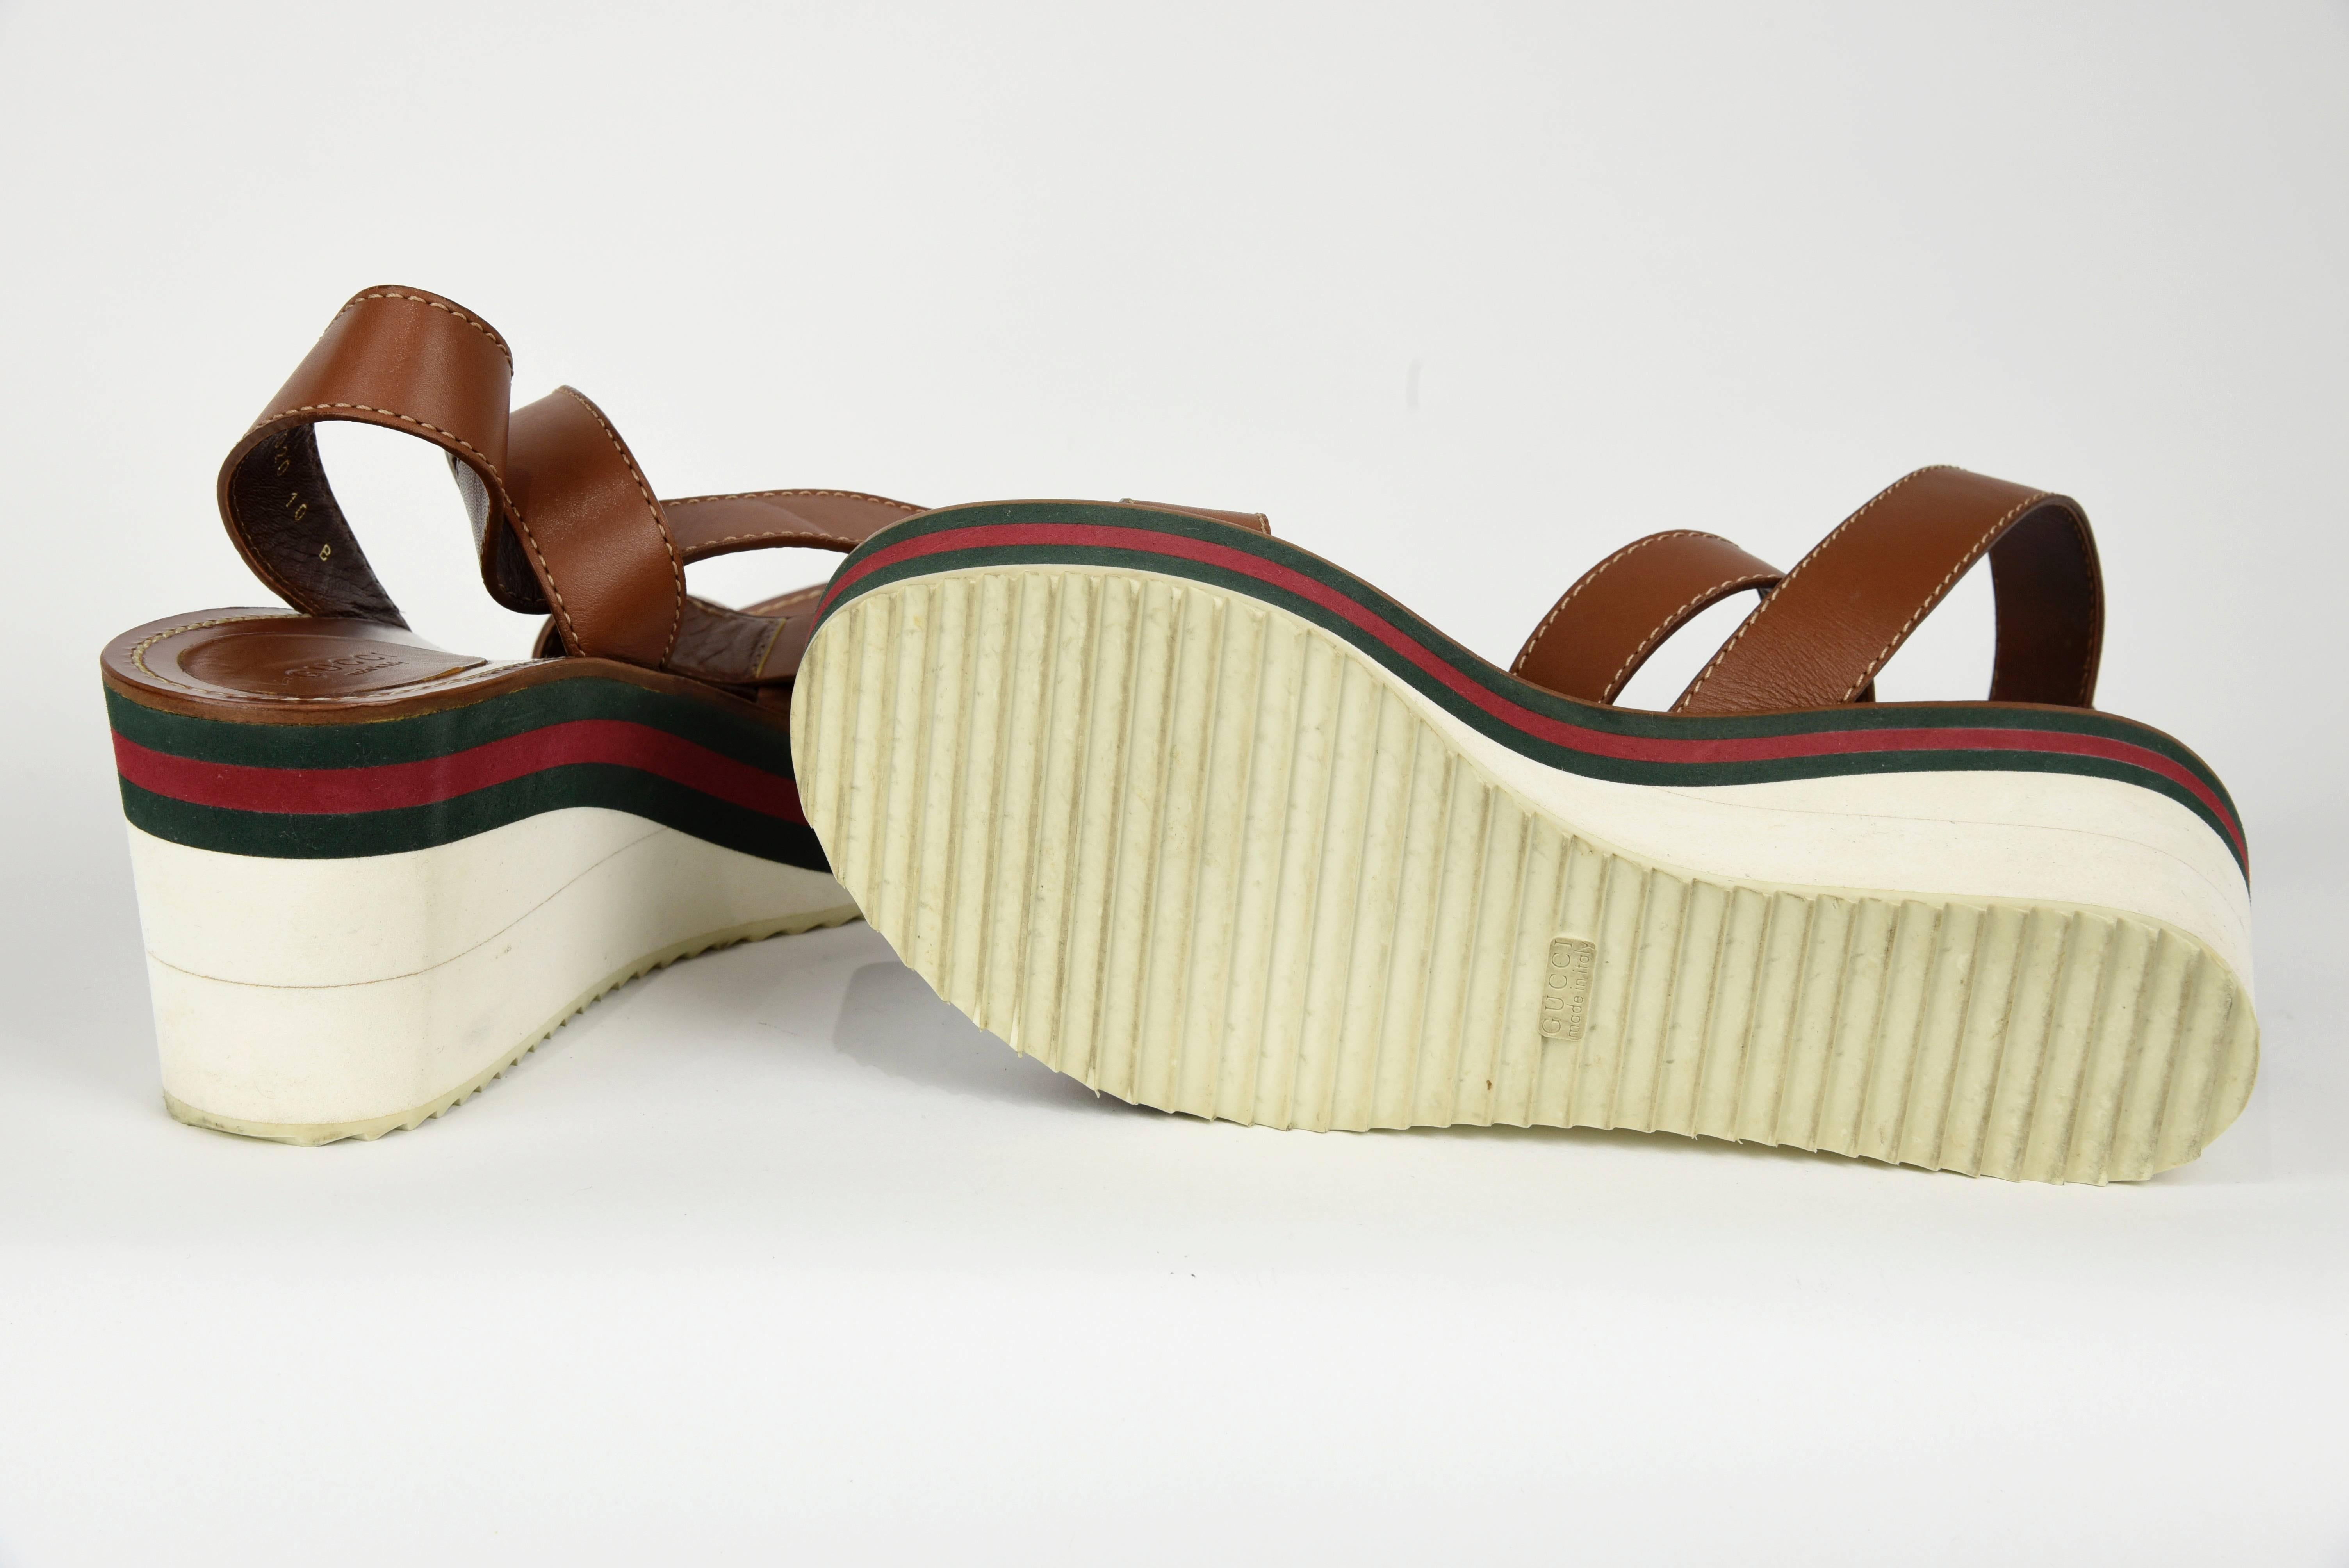 2000s Gucci Brown, Red and Green Platform Sandals with Ankle Wrap, Size 10 B 4